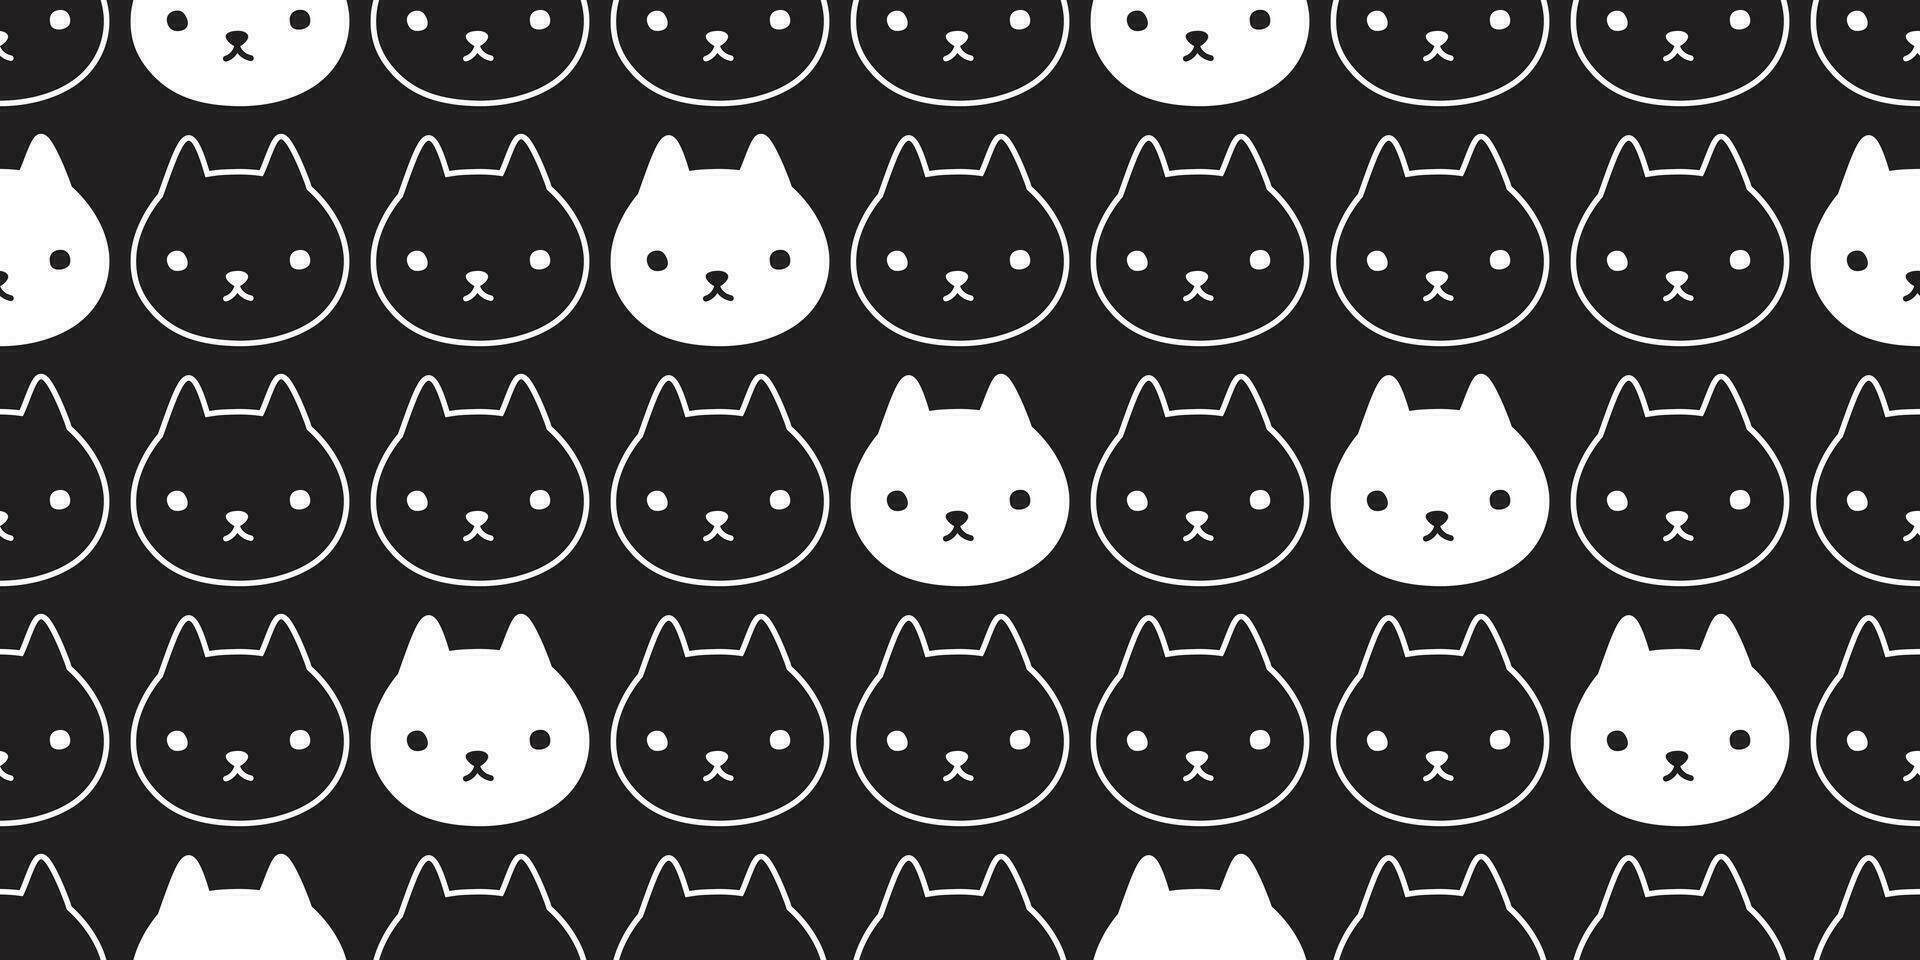 cat seamless pattern vector kitten head face cartoon scarf isolated tile wallpaper repeat background doodle illustration design